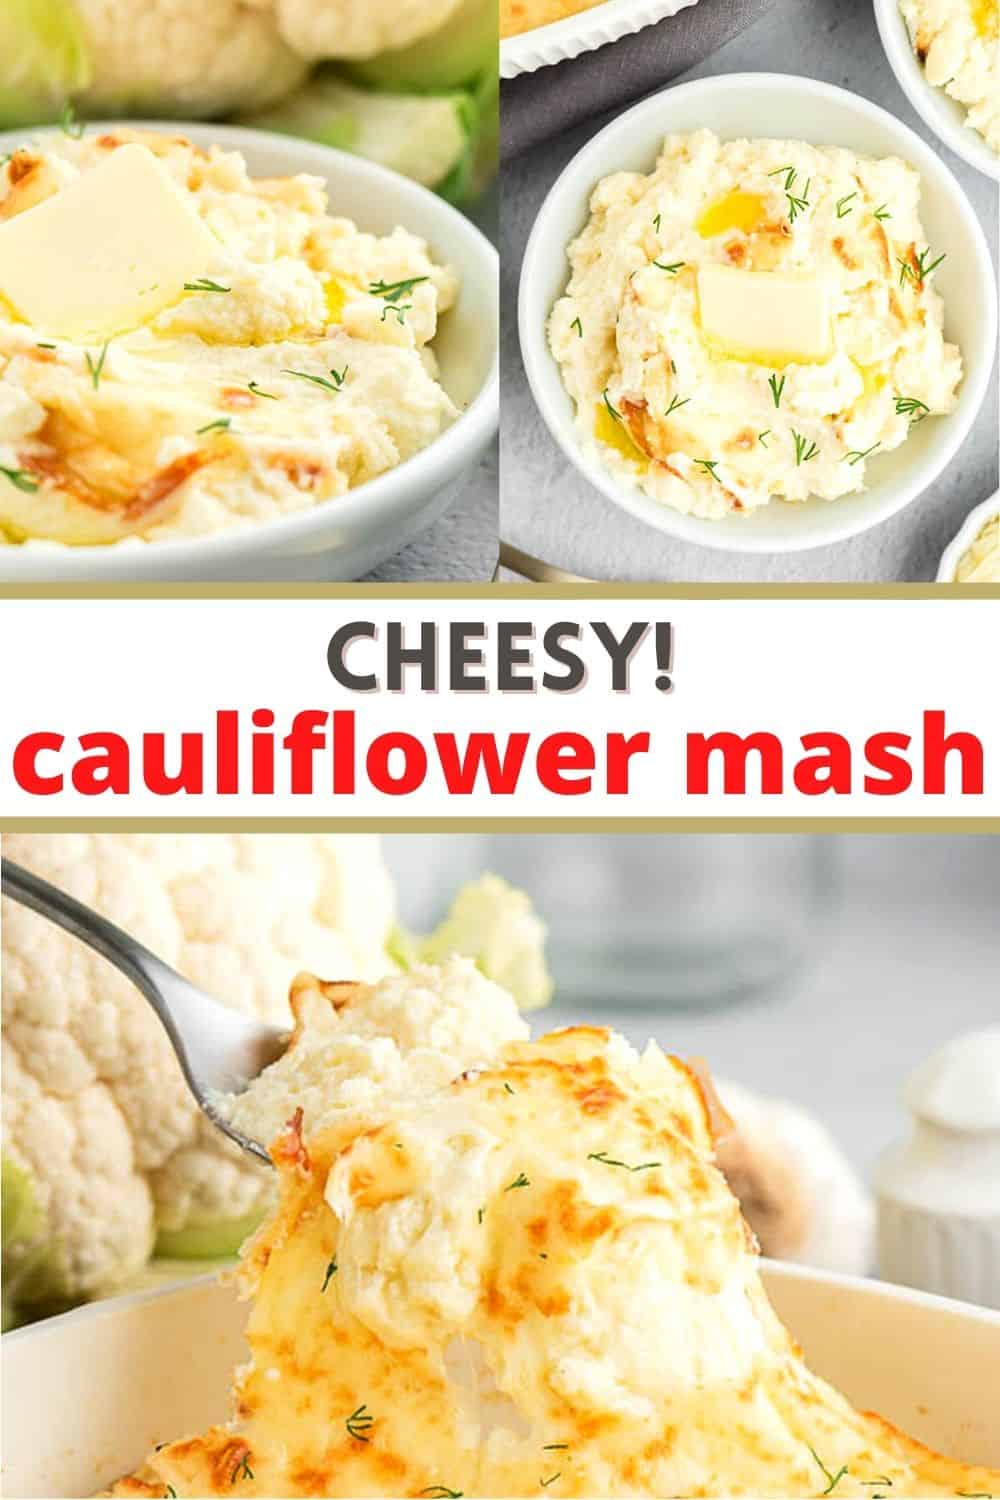 This mashed cauliflower tastes so good, our family prefers it over mashed potatoes! Cheesy cauliflower mash is the perfect side dish for your low carb meals.